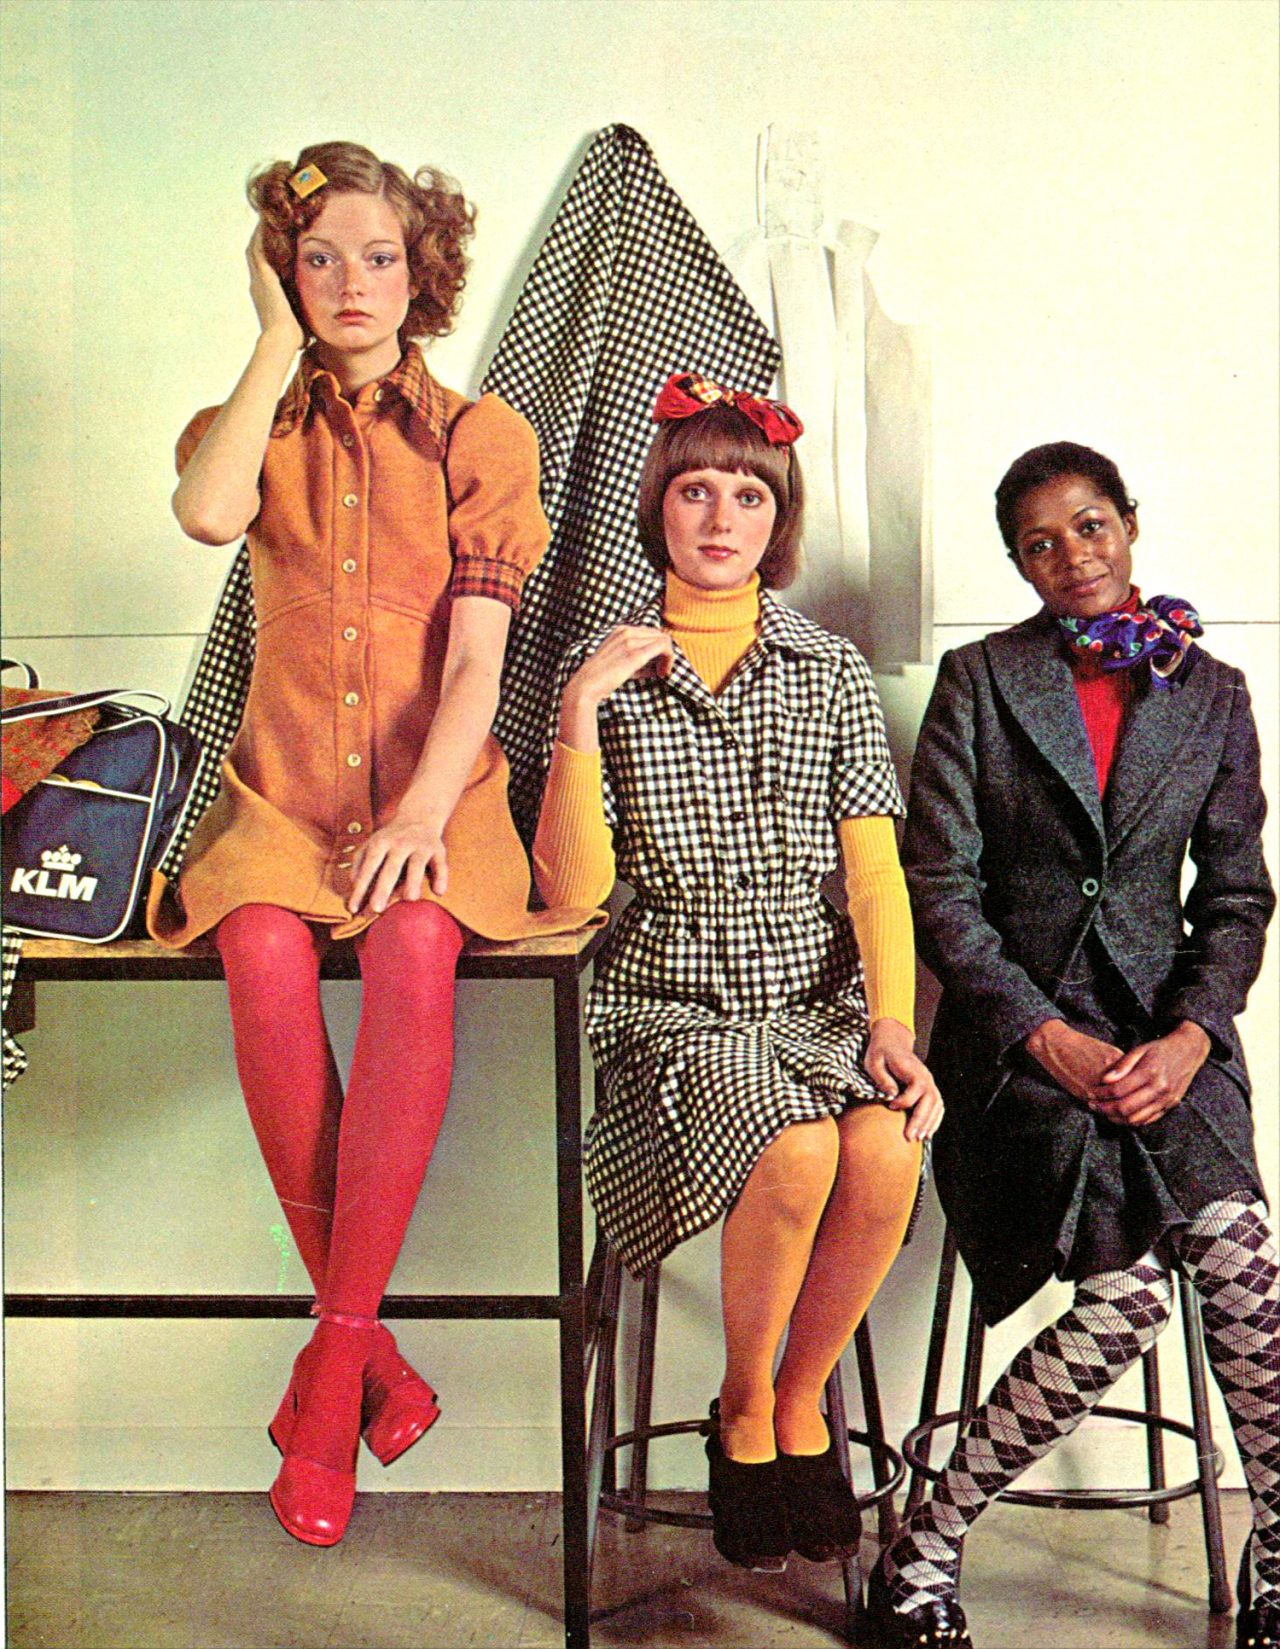 Clothes and men's and ladies fashions in the 1960's prices and